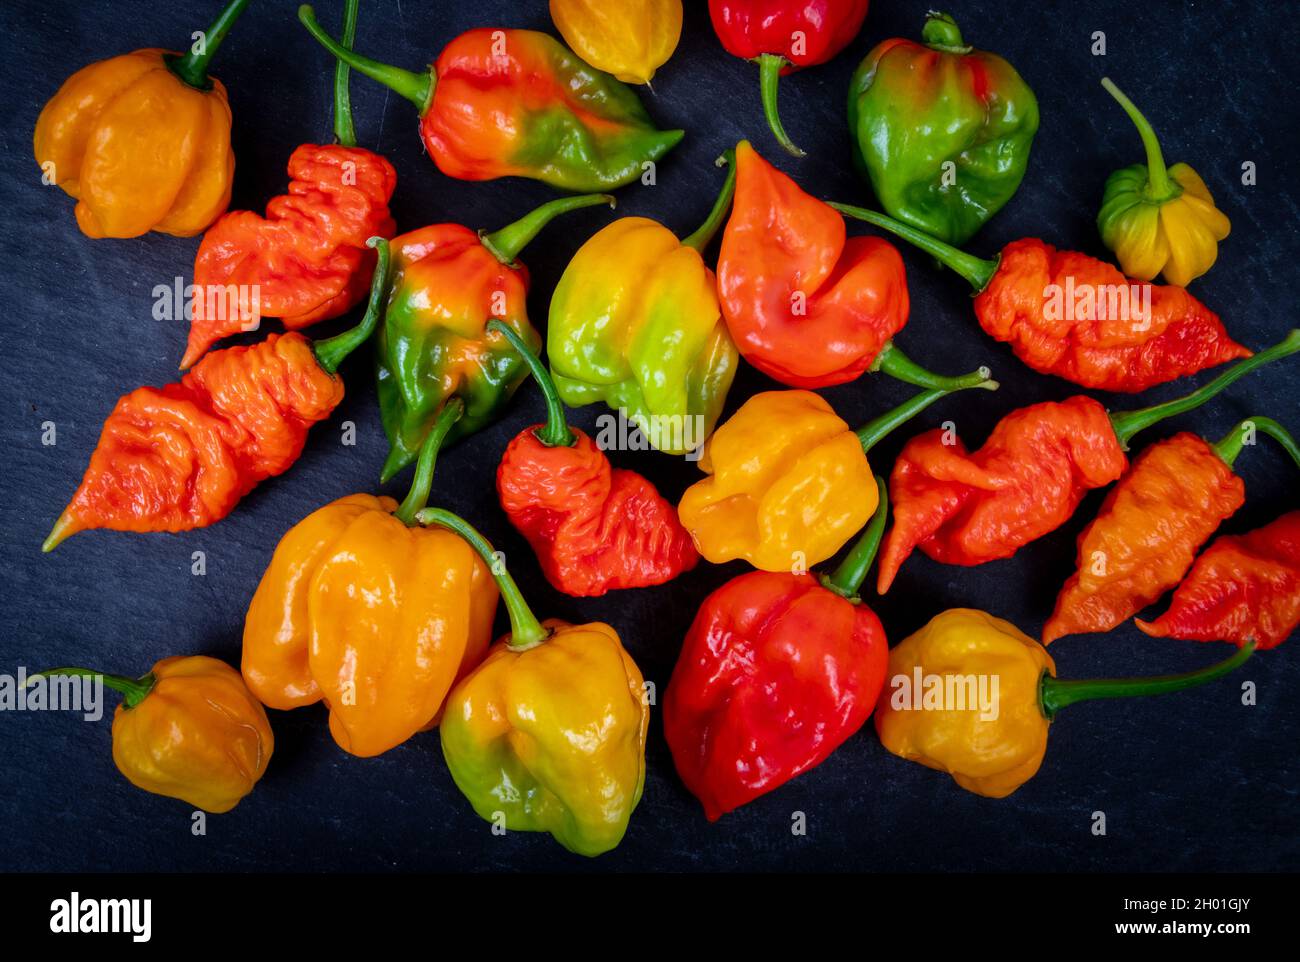 fresh assorted hot peppers chiles on black background. Death spiral habanero scotch bonnet trinidad Stock Photo